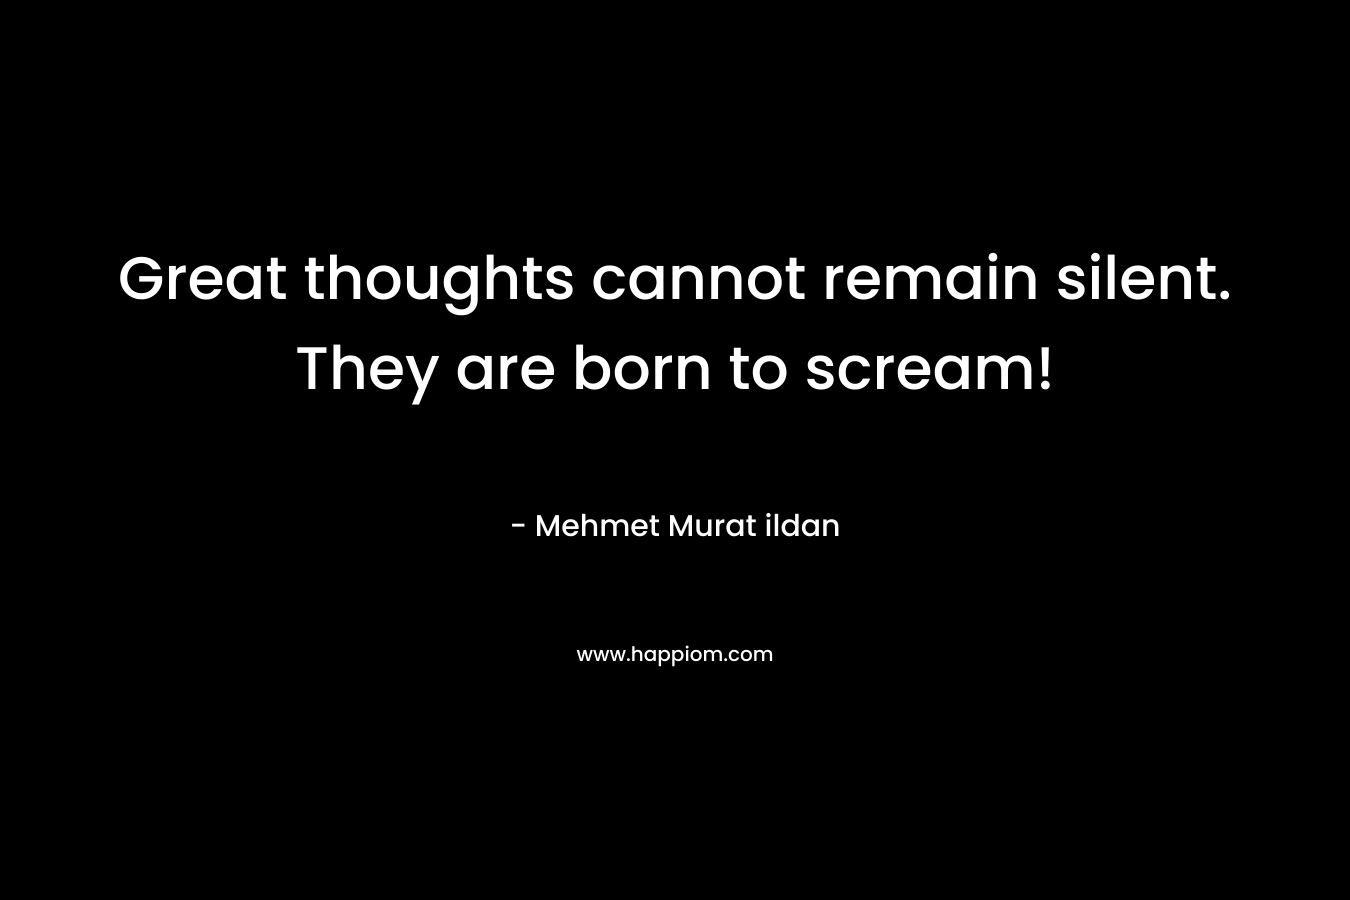 Great thoughts cannot remain silent. They are born to scream!